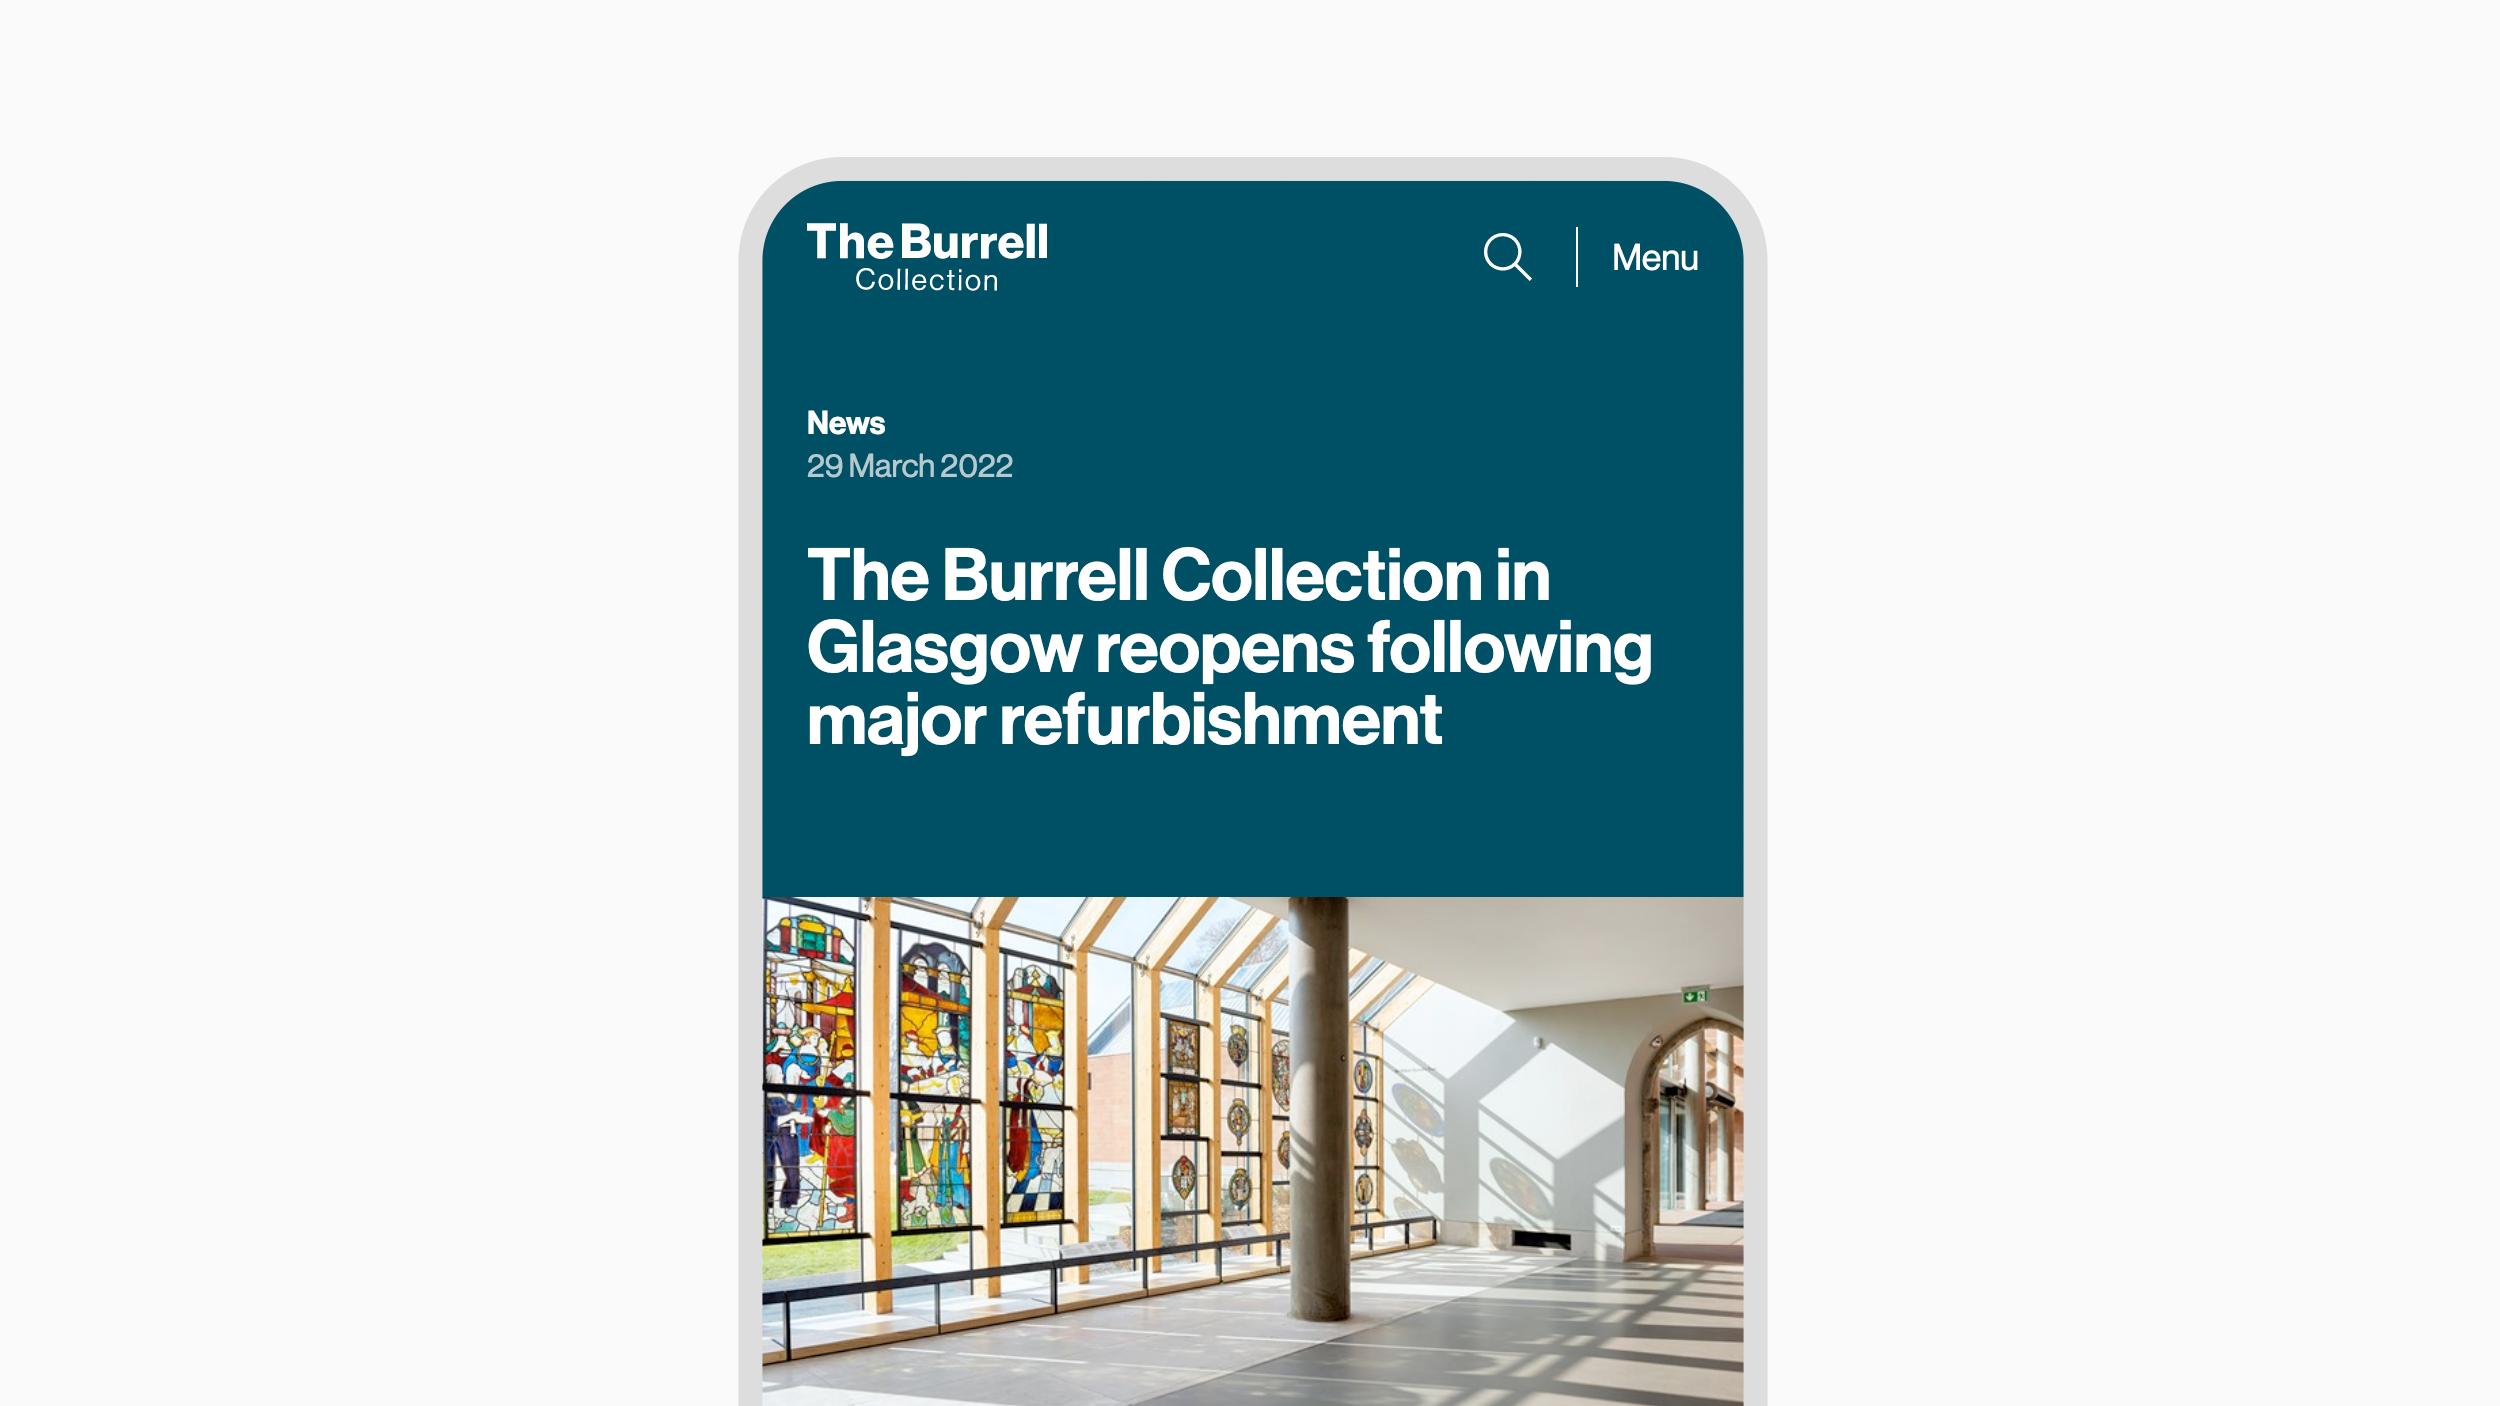 The Burrell Collection website on a smart phone, showing a news article page